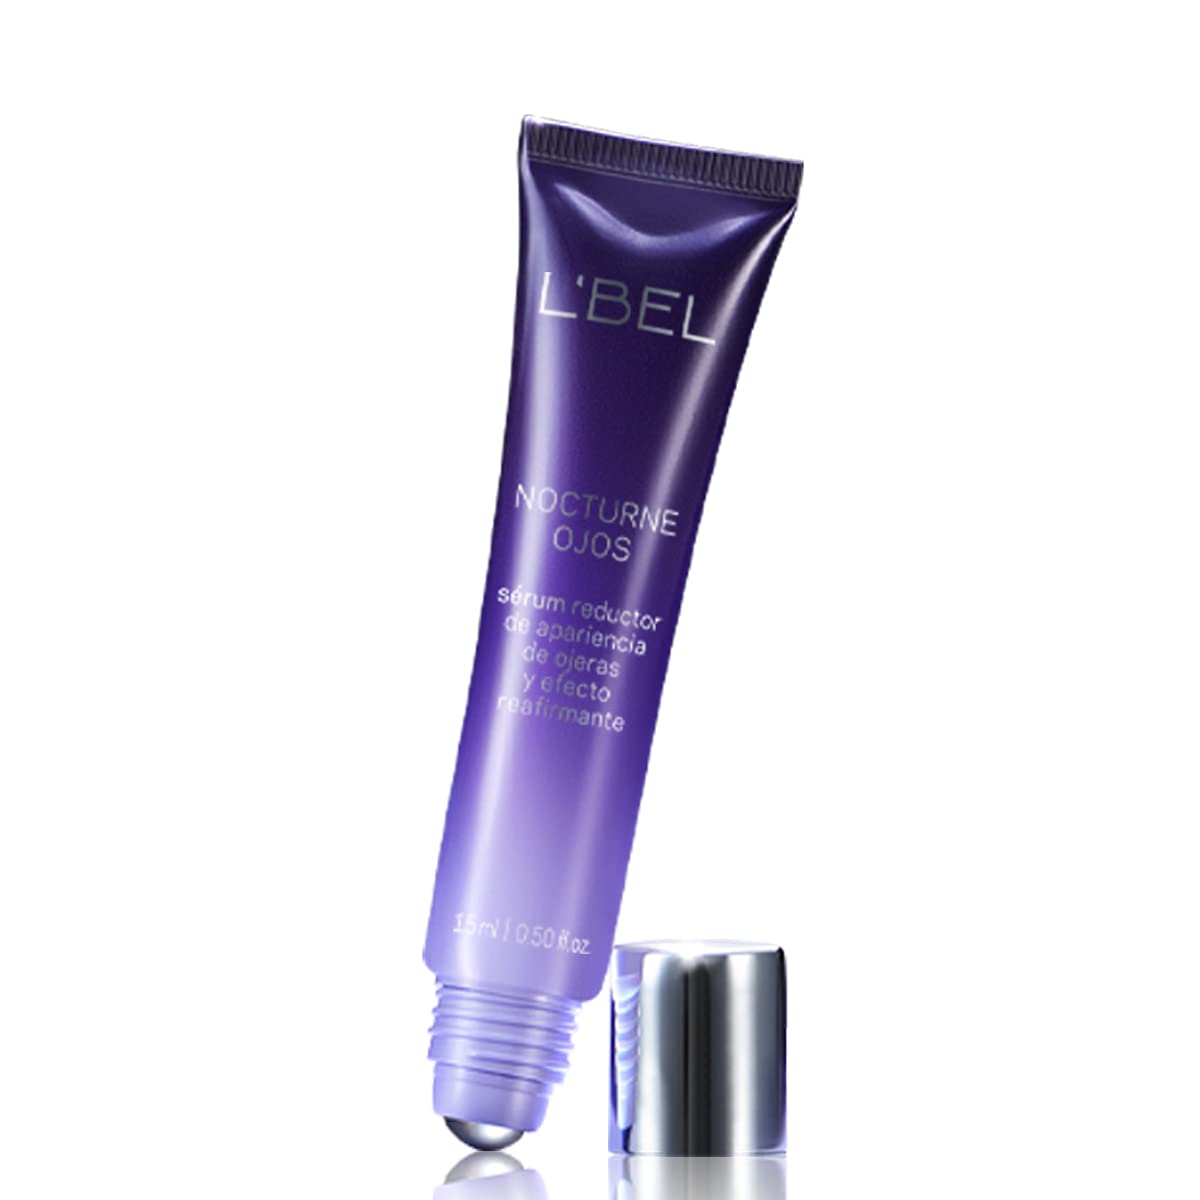 L'Bel - Nocturne Eye Cream with Hyaluronic Acid, Provides firmness, Fights Dark Circles and Bags